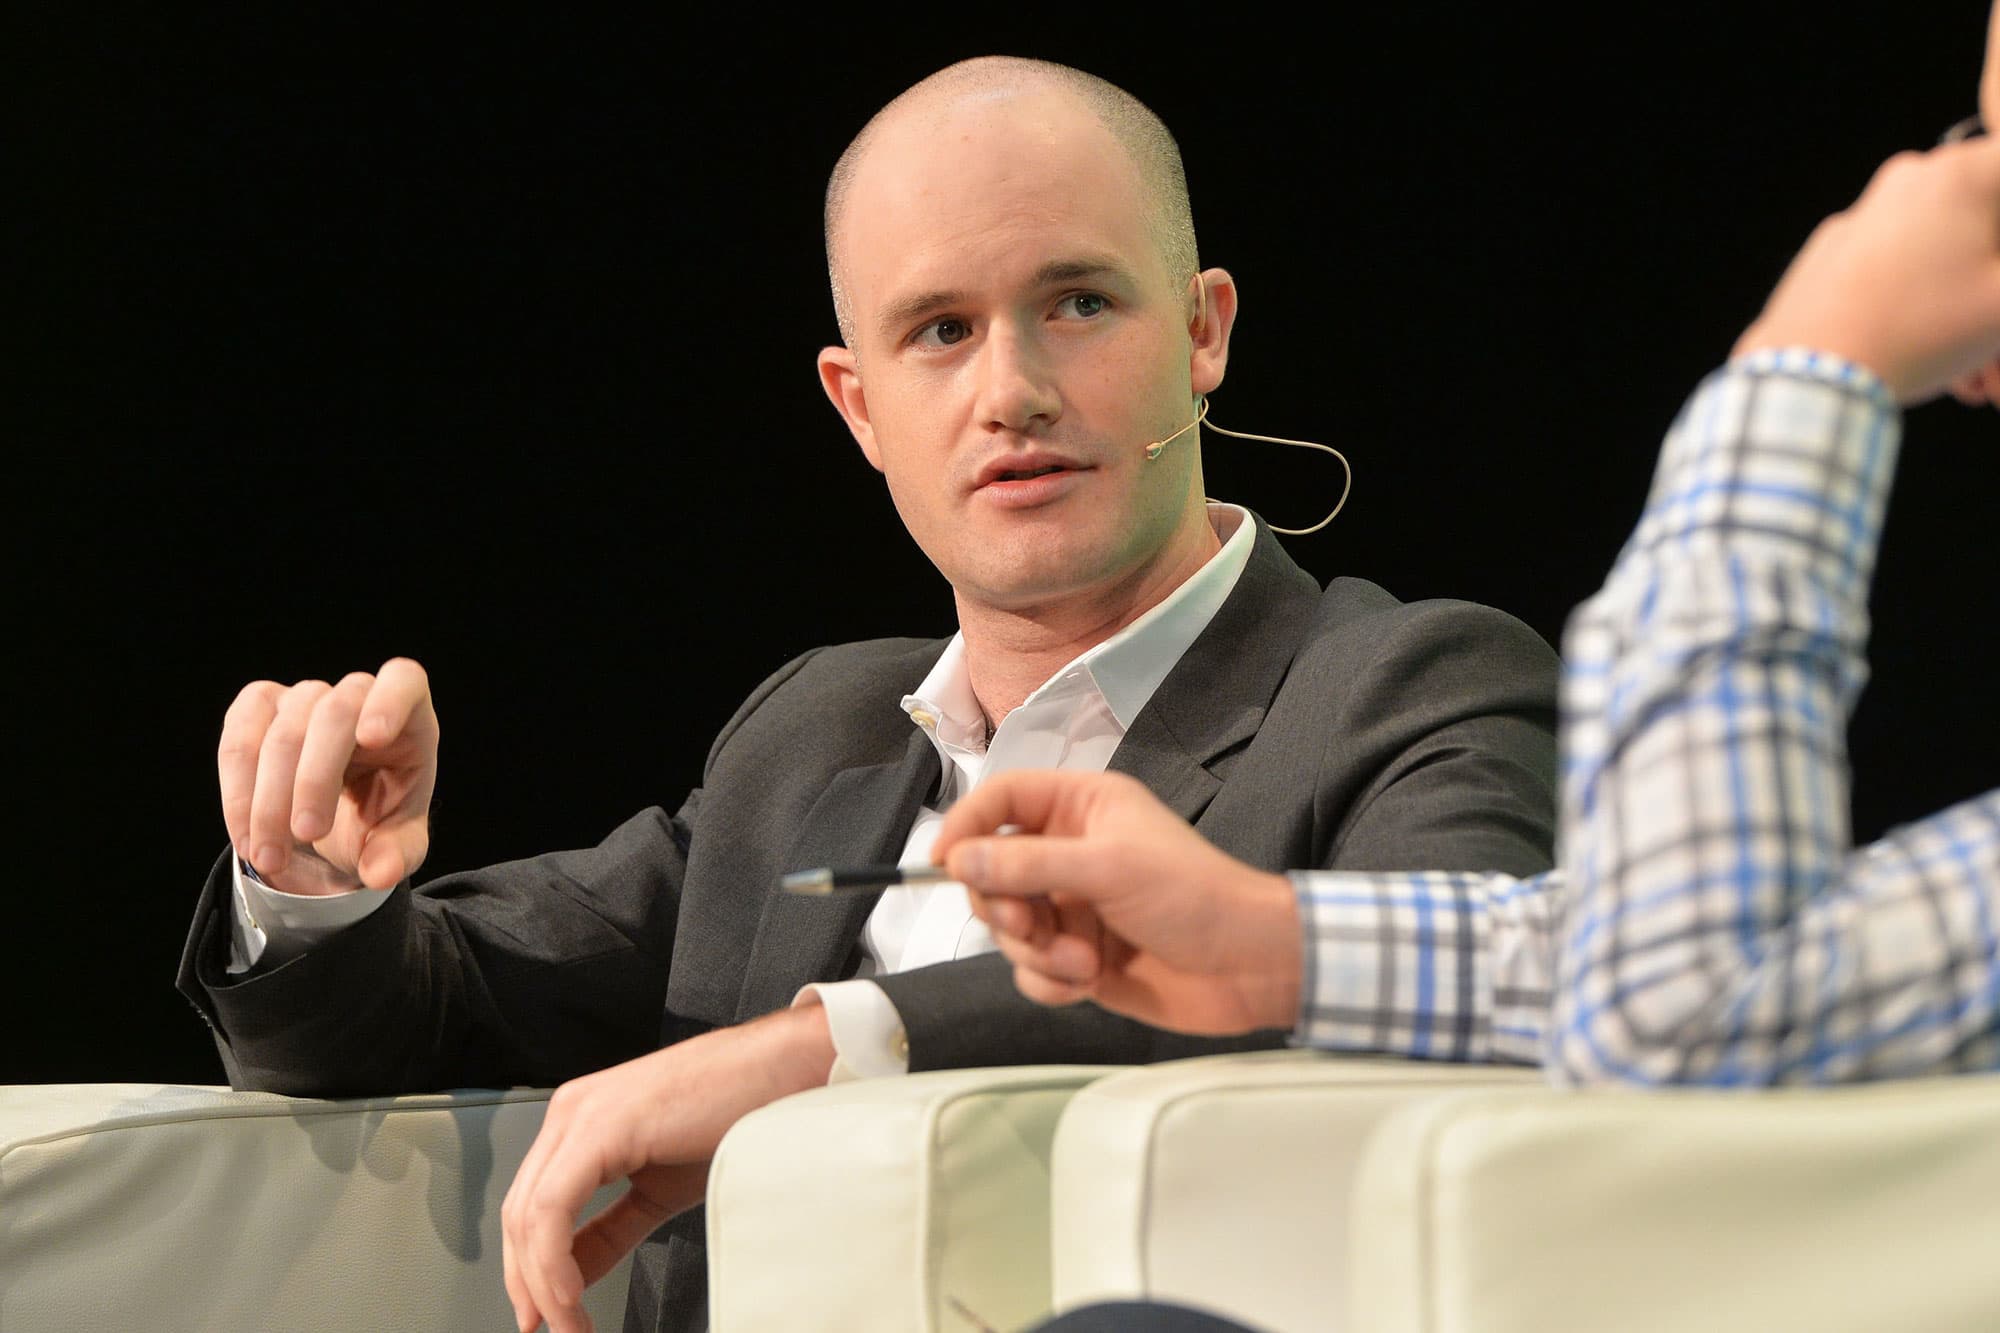 Coinbase CEO discourages politics at work, offers generous severance to employees who want to quit - CNBC